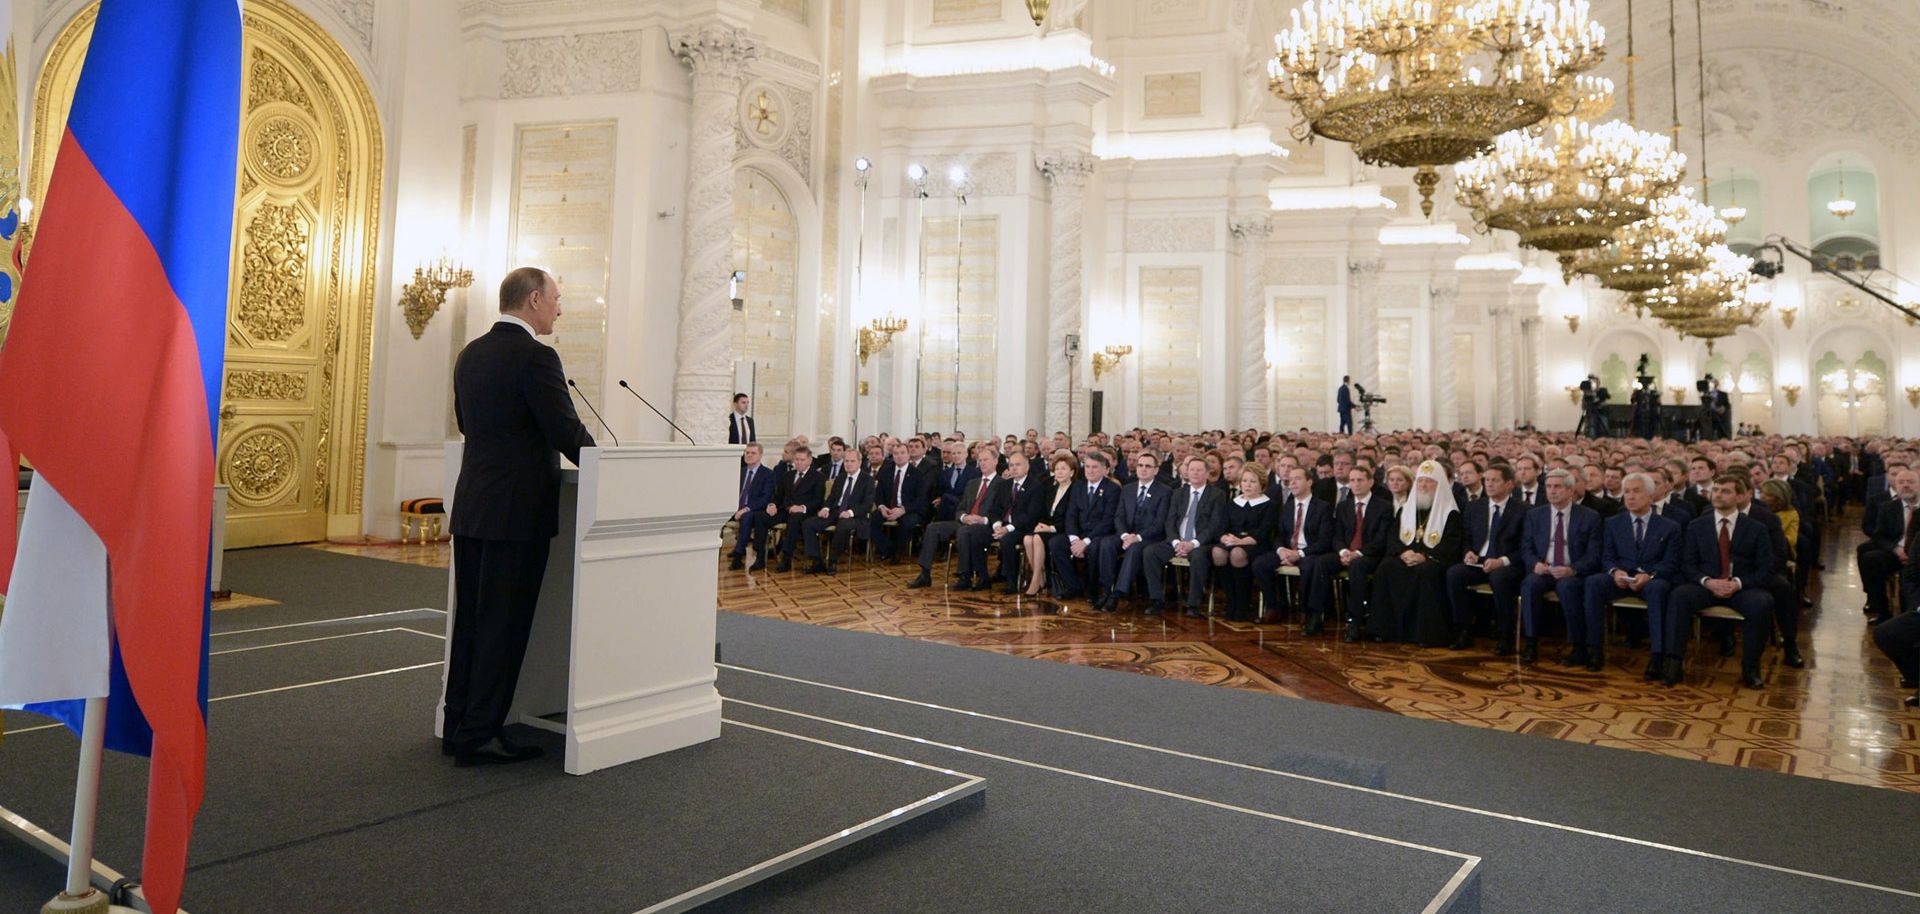 Russian President Vladimir Putin delivered his annual state of the nation address on Dec. 3, 2015, at the Kremlin.